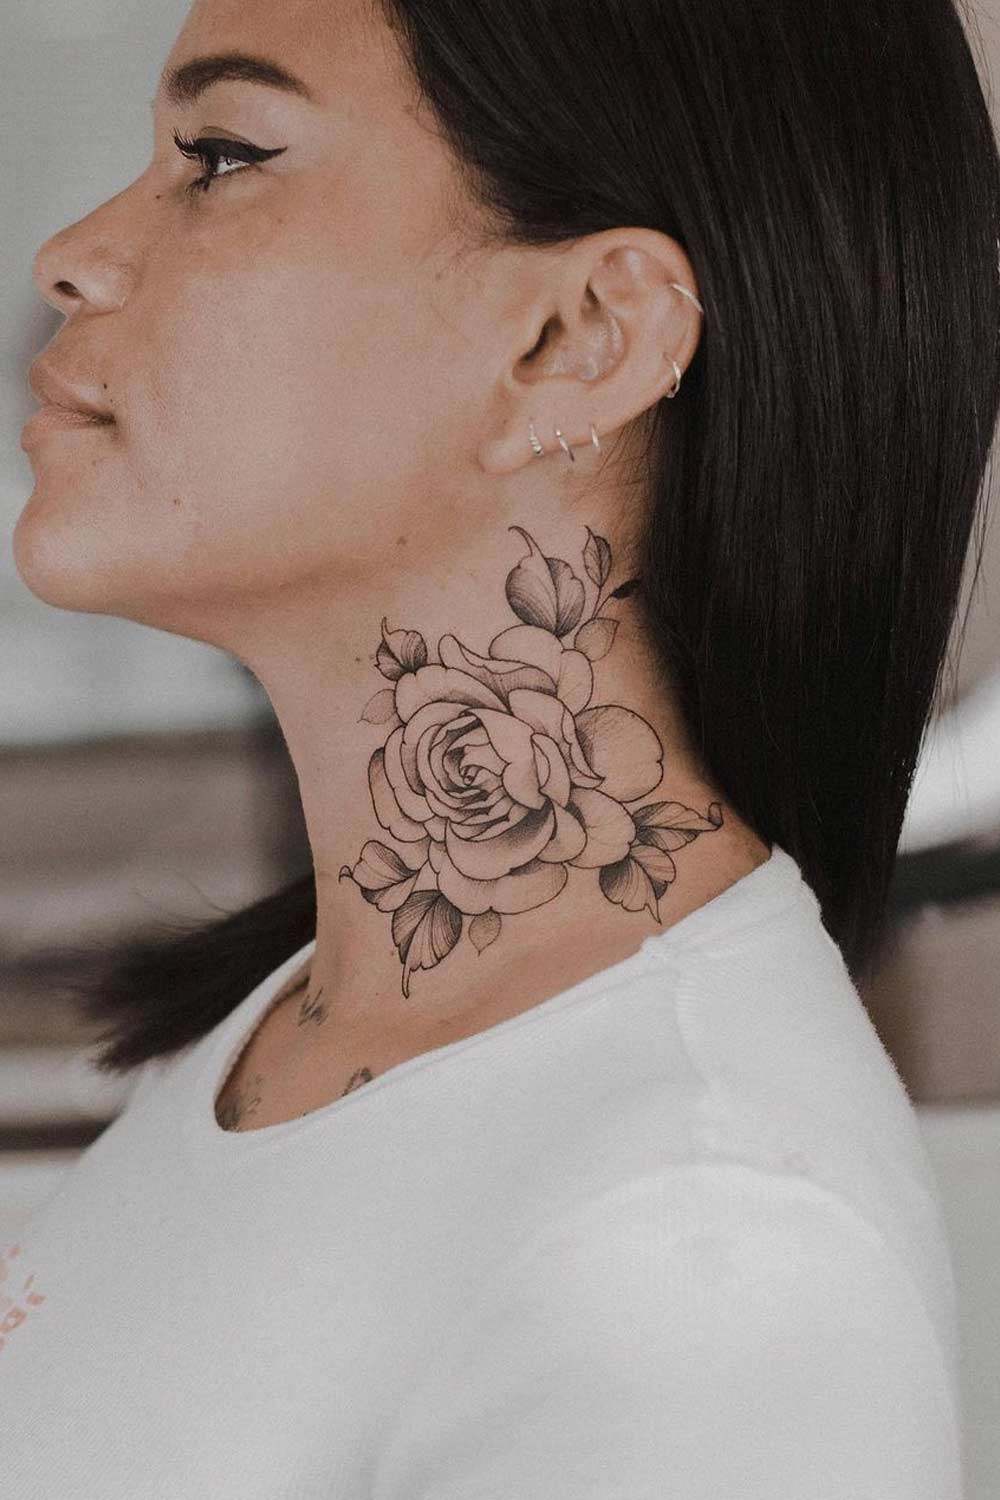 How to Avoid Fading for Neck Tattoos